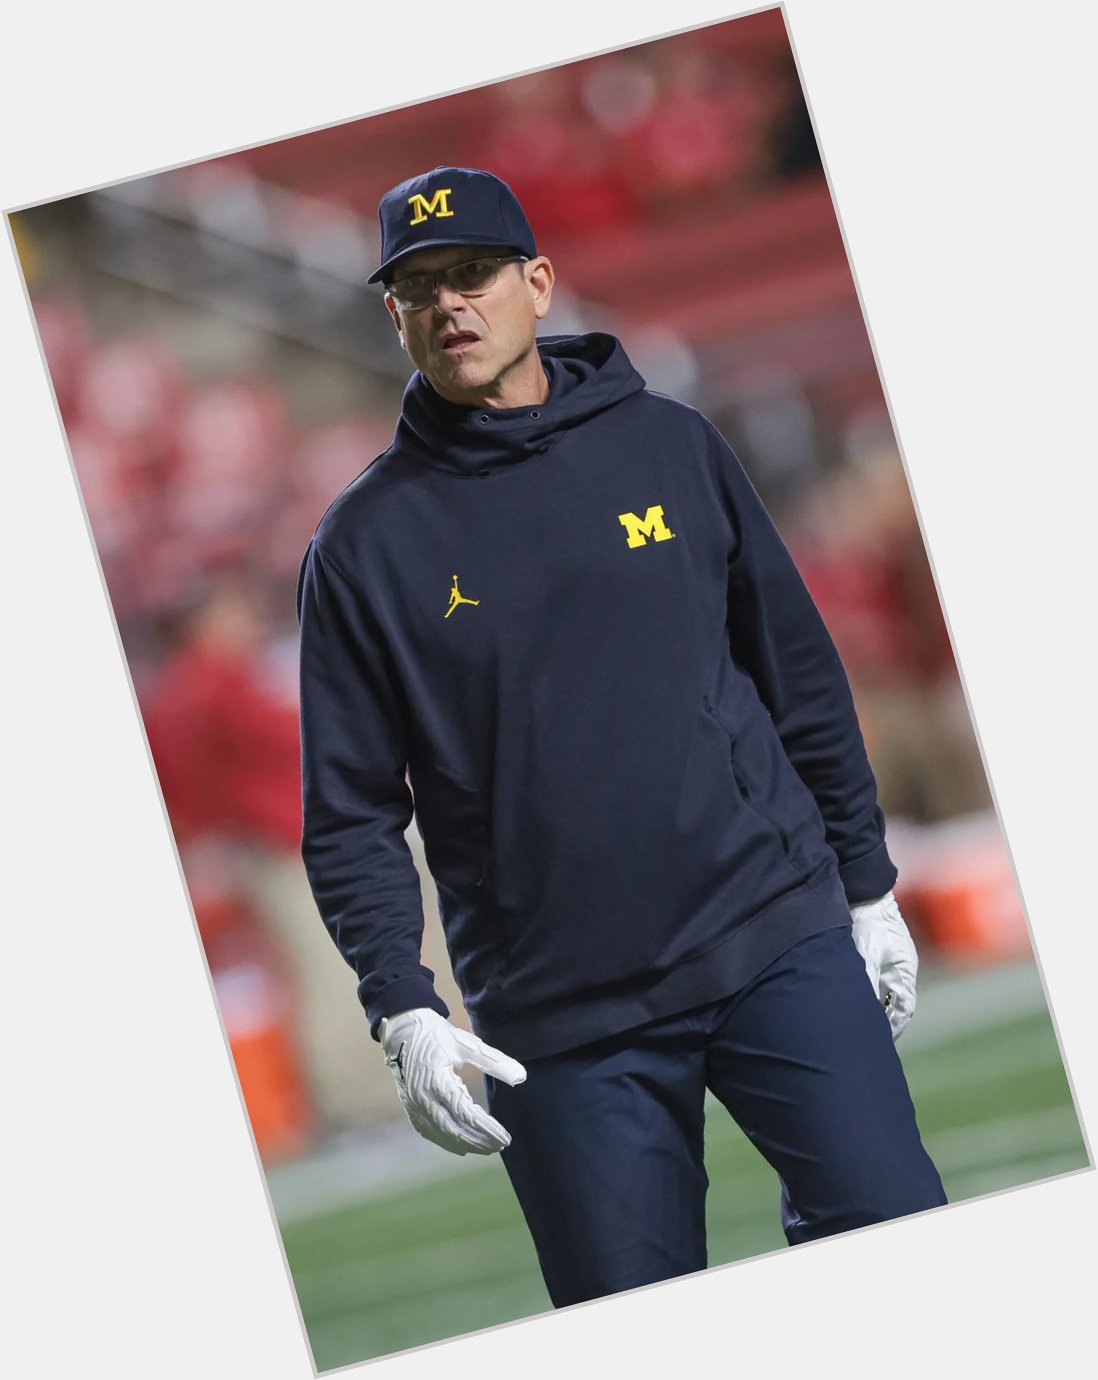 Jim Harbaugh is 59 today

Happy birthday, Coach! 